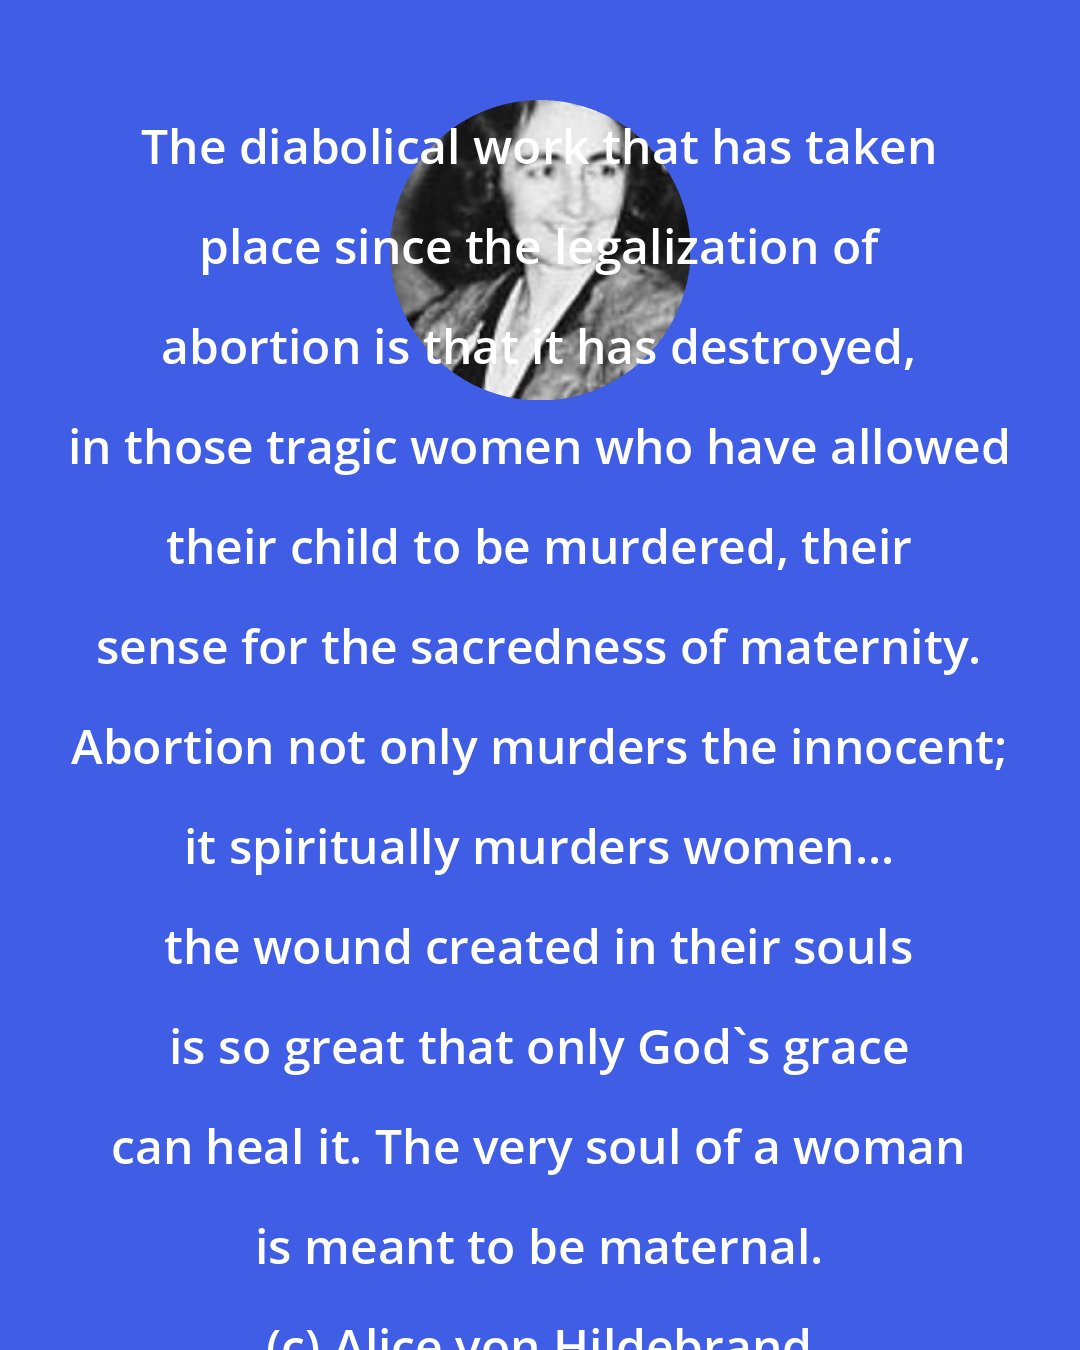 Alice von Hildebrand: The diabolical work that has taken place since the legalization of abortion is that it has destroyed, in those tragic women who have allowed their child to be murdered, their sense for the sacredness of maternity. Abortion not only murders the innocent; it spiritually murders women... the wound created in their souls is so great that only God's grace can heal it. The very soul of a woman is meant to be maternal.